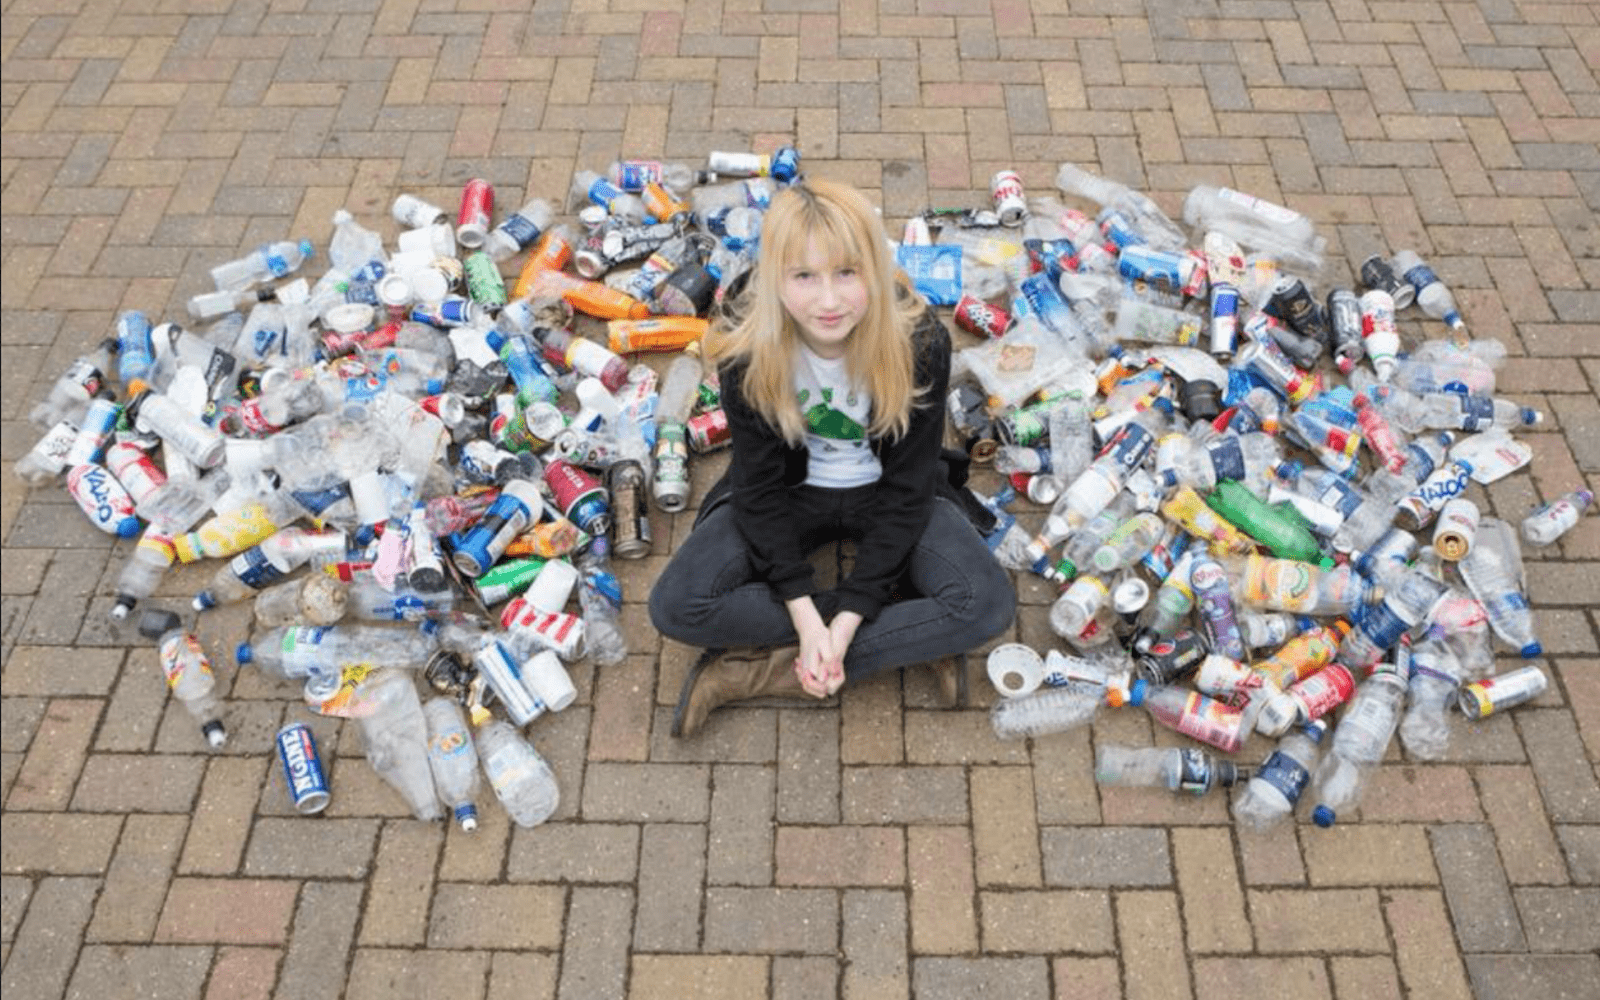 12 Year-Old Super Hero Saves The World, One Piece Of Rubbish At A Time